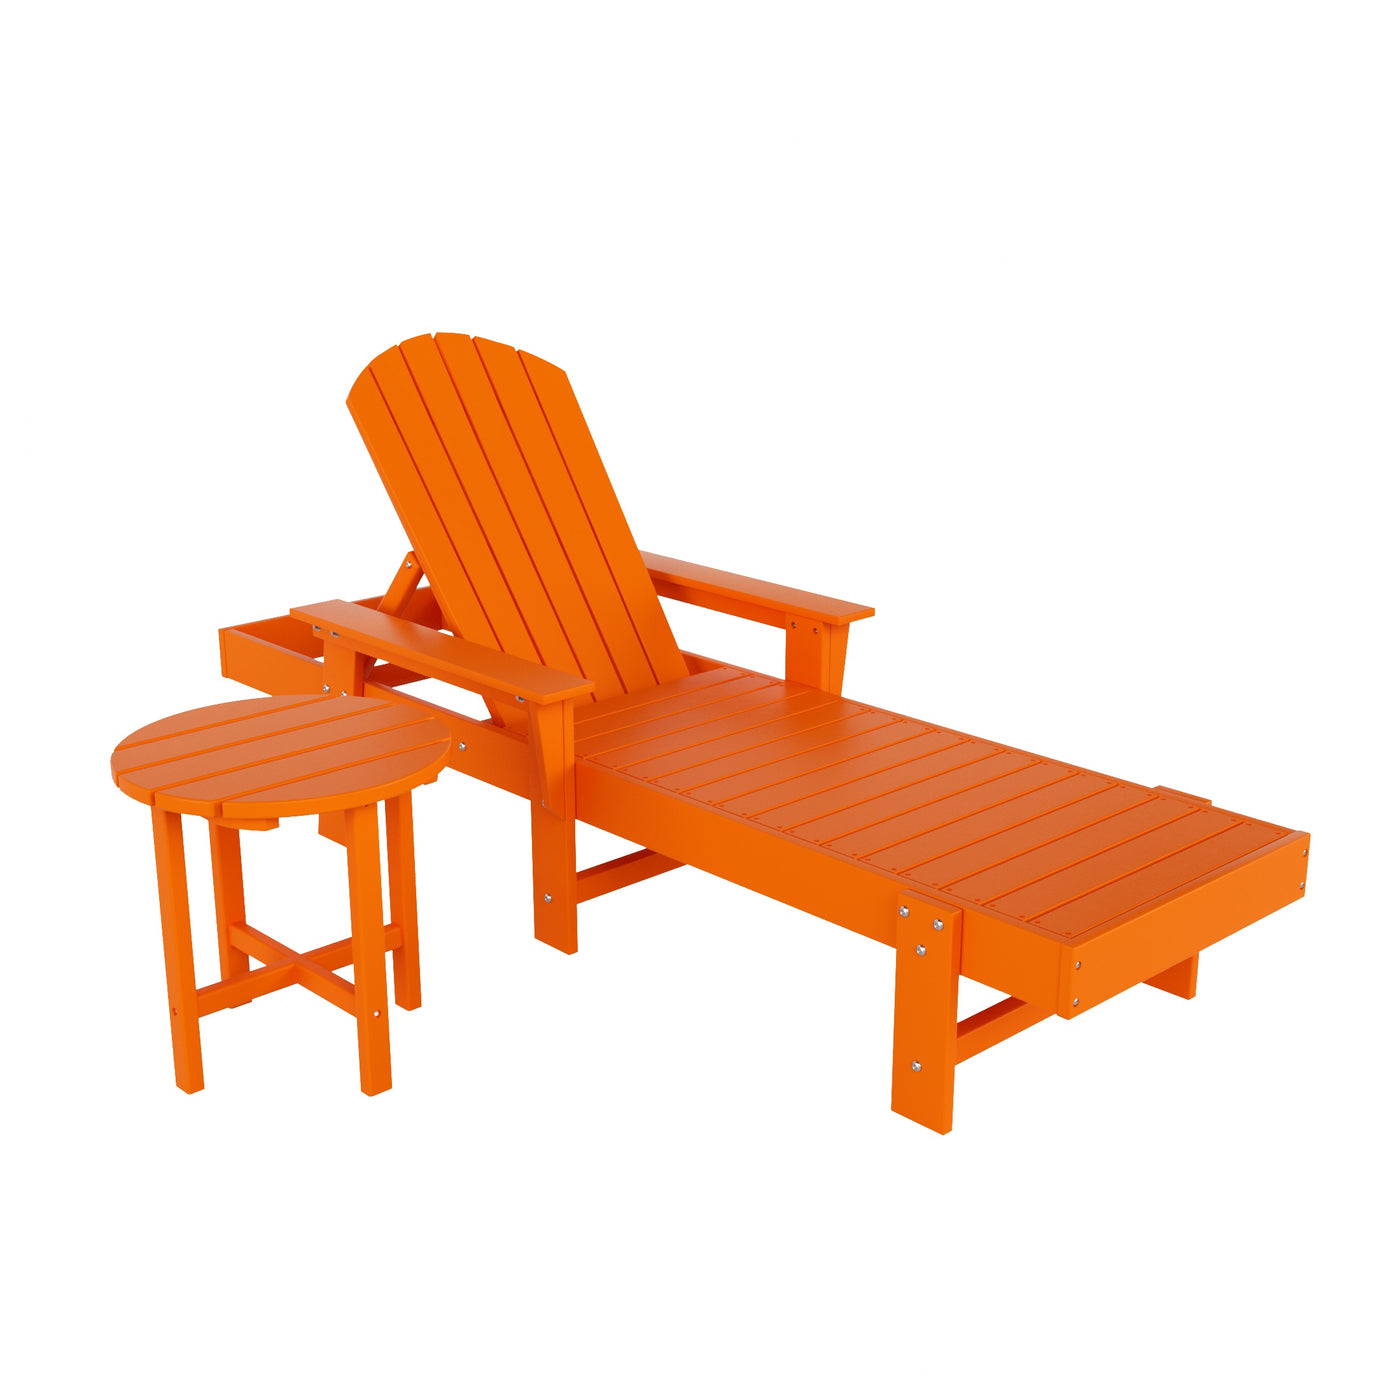 Dylan 2 Piece Adirondack Reclining Chaise Lounge With Arms